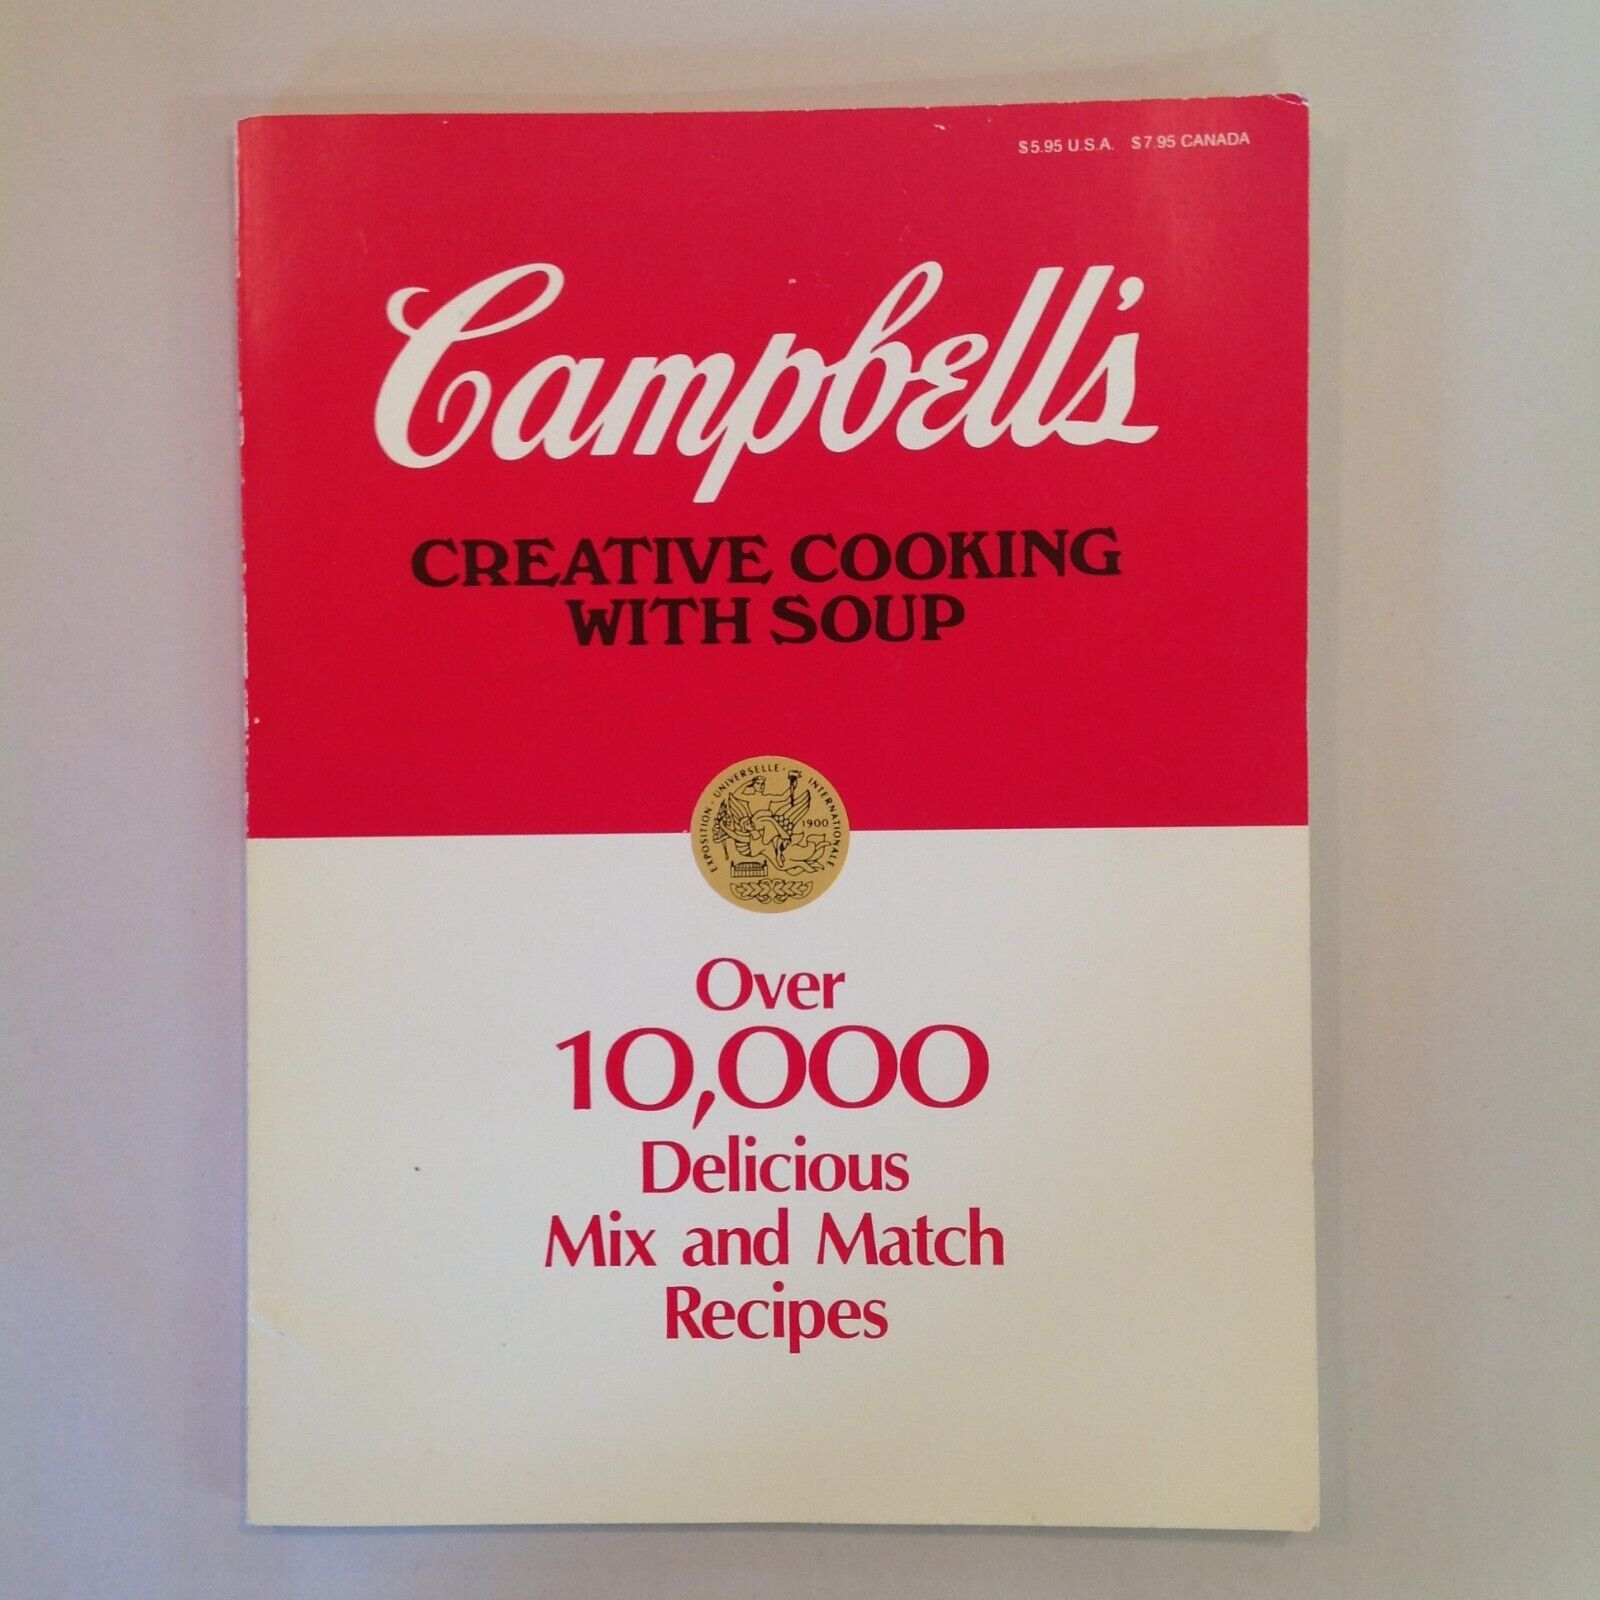 Vintage 1988 Campbell's Creative Cooking with Soup Trade Paperback Recipe Book